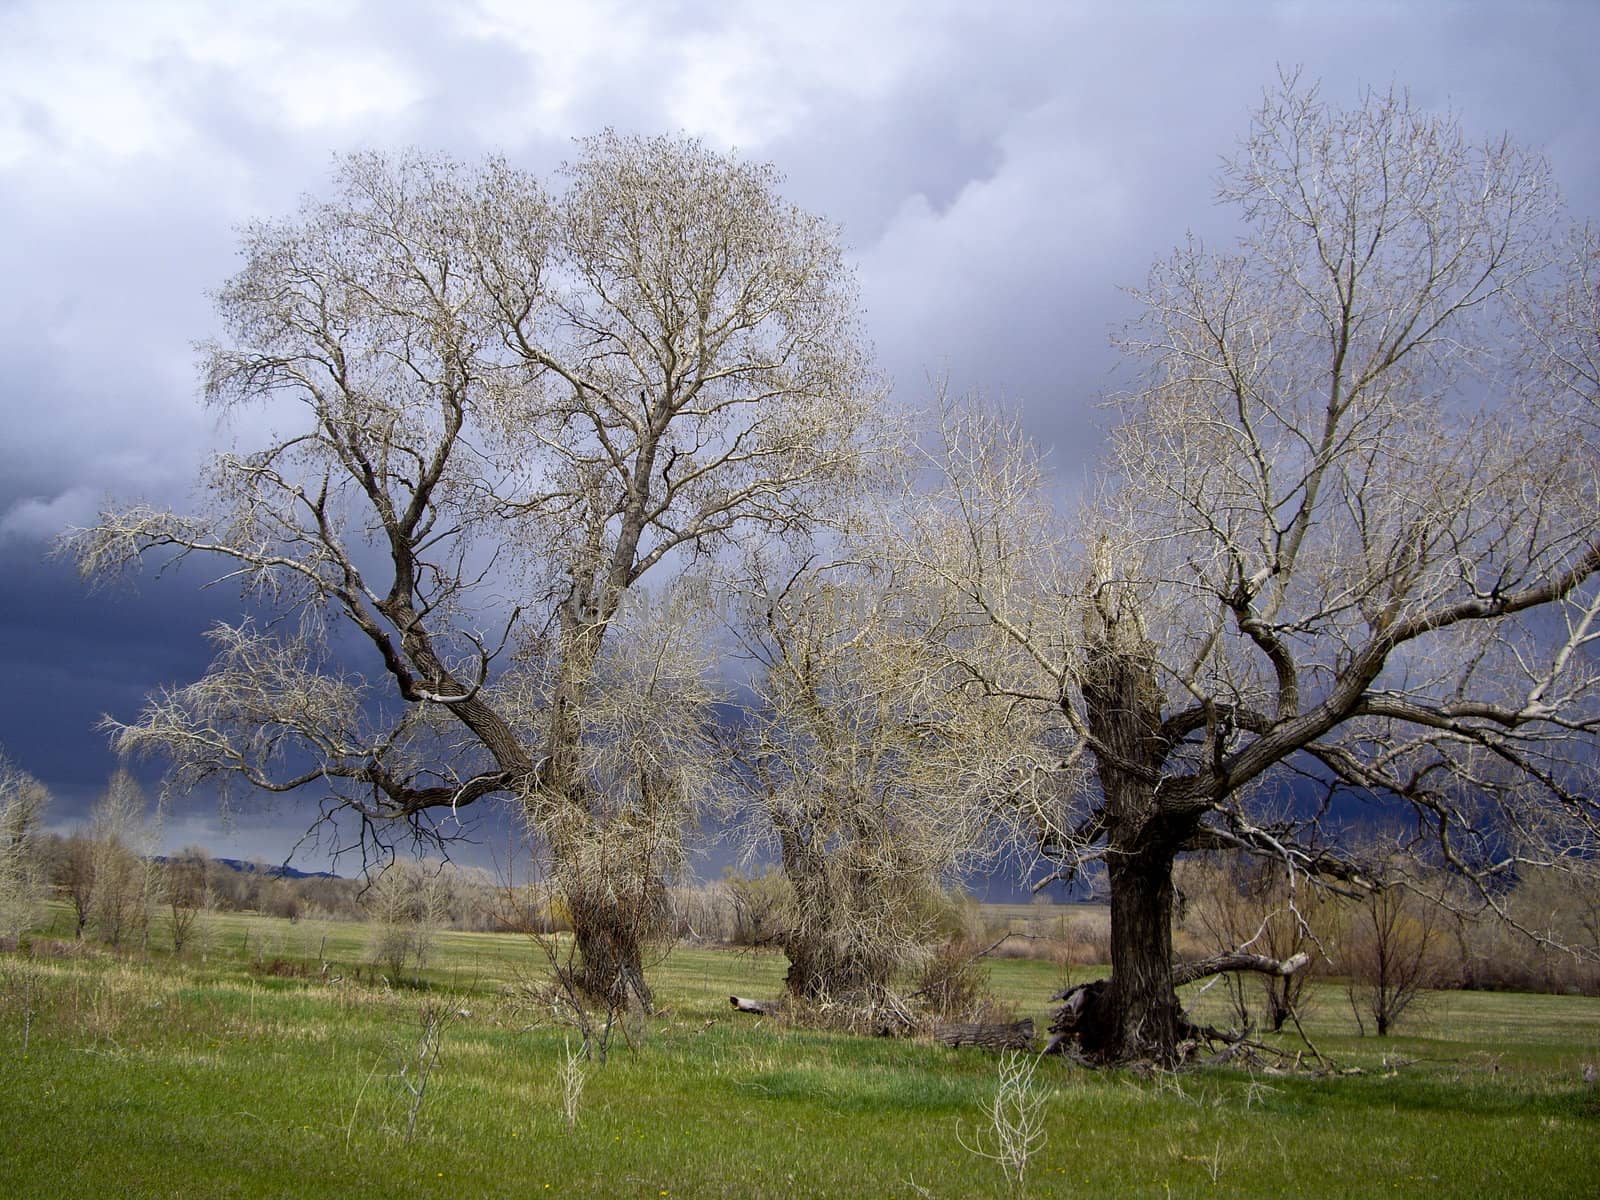 Storms claers over trees in Montana filed